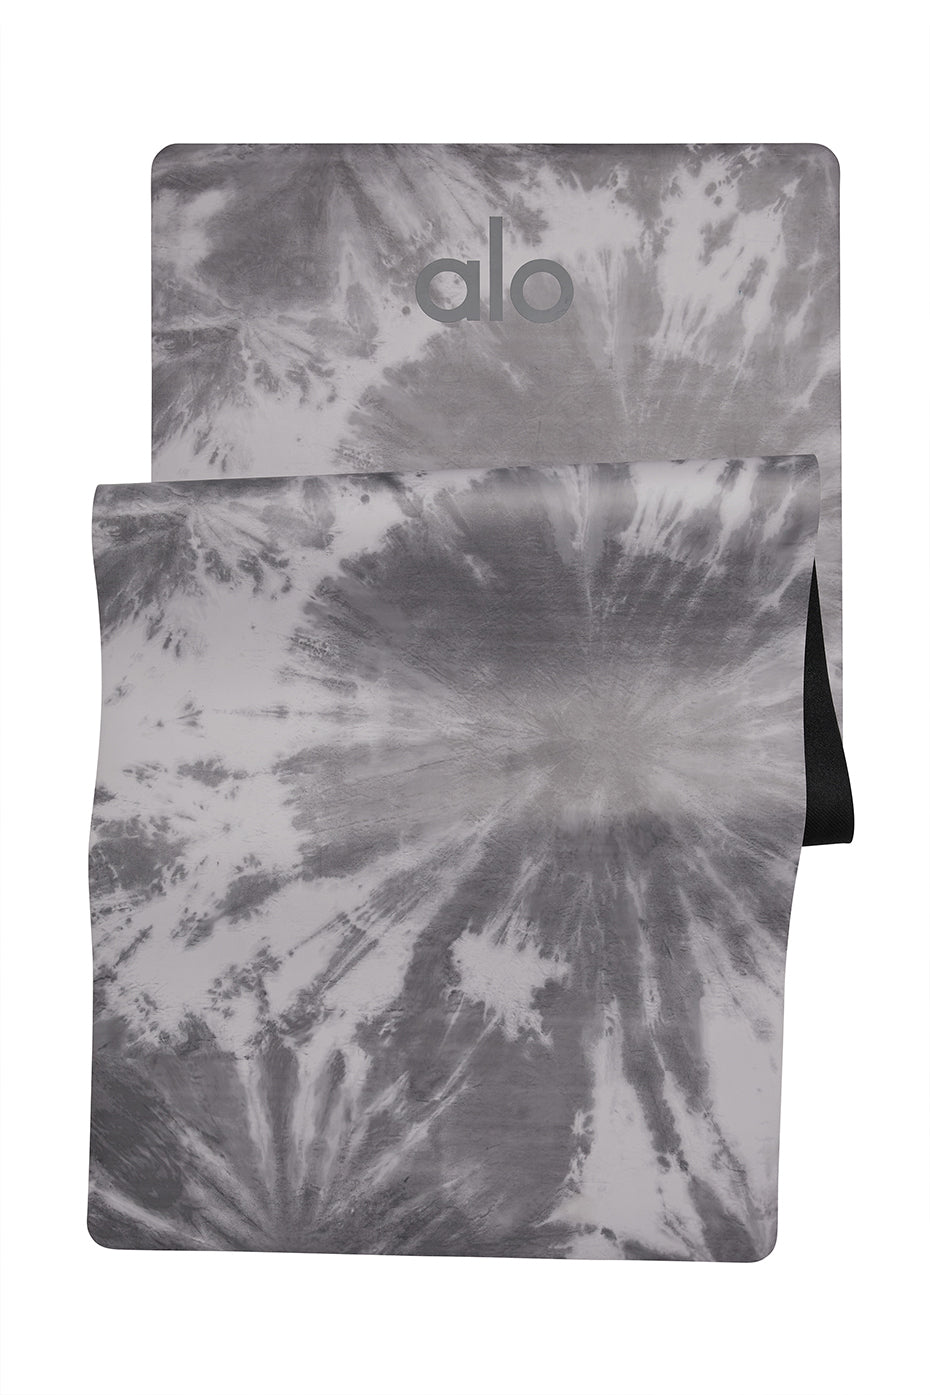 Promotion Alo Yoga Tie-Dye Grounded No-Slip Towel For Men Bright Aqua Tie  Dye in United States now available at a discount